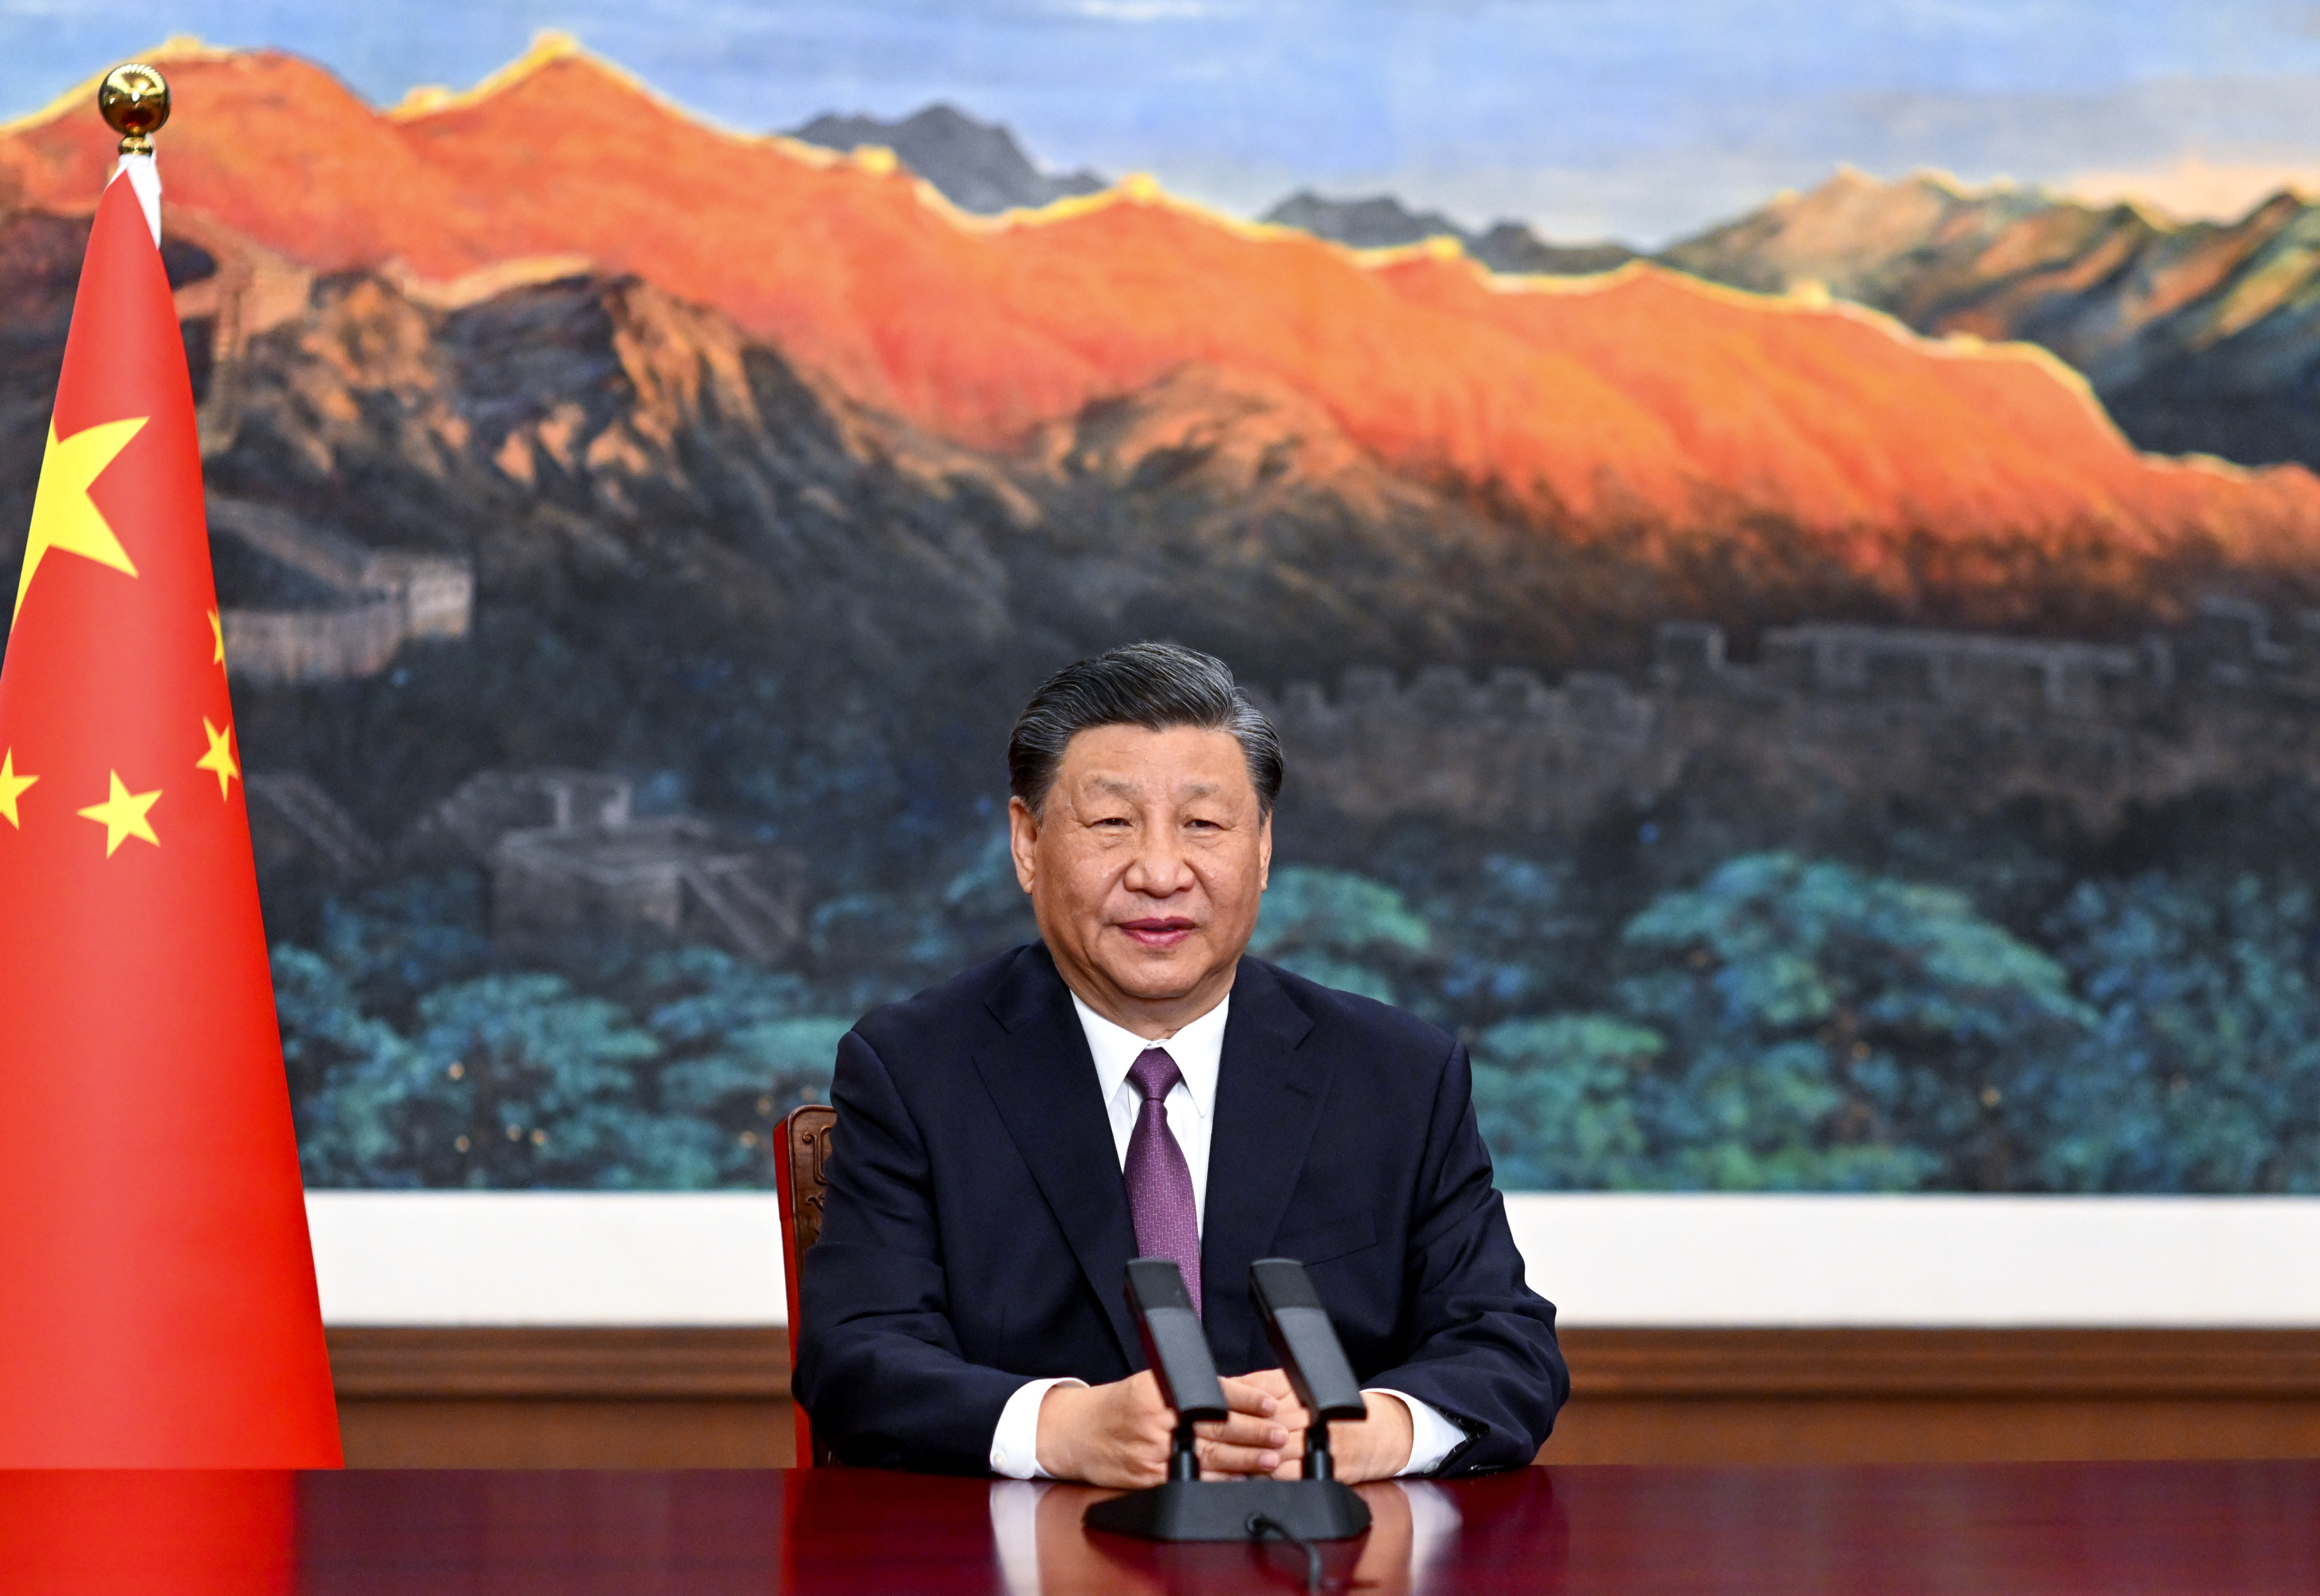 President Xi Jinping told the forum that the belt and road scheme aims to “open up a path of happiness that benefits the whole world”. Photo: Xinhua